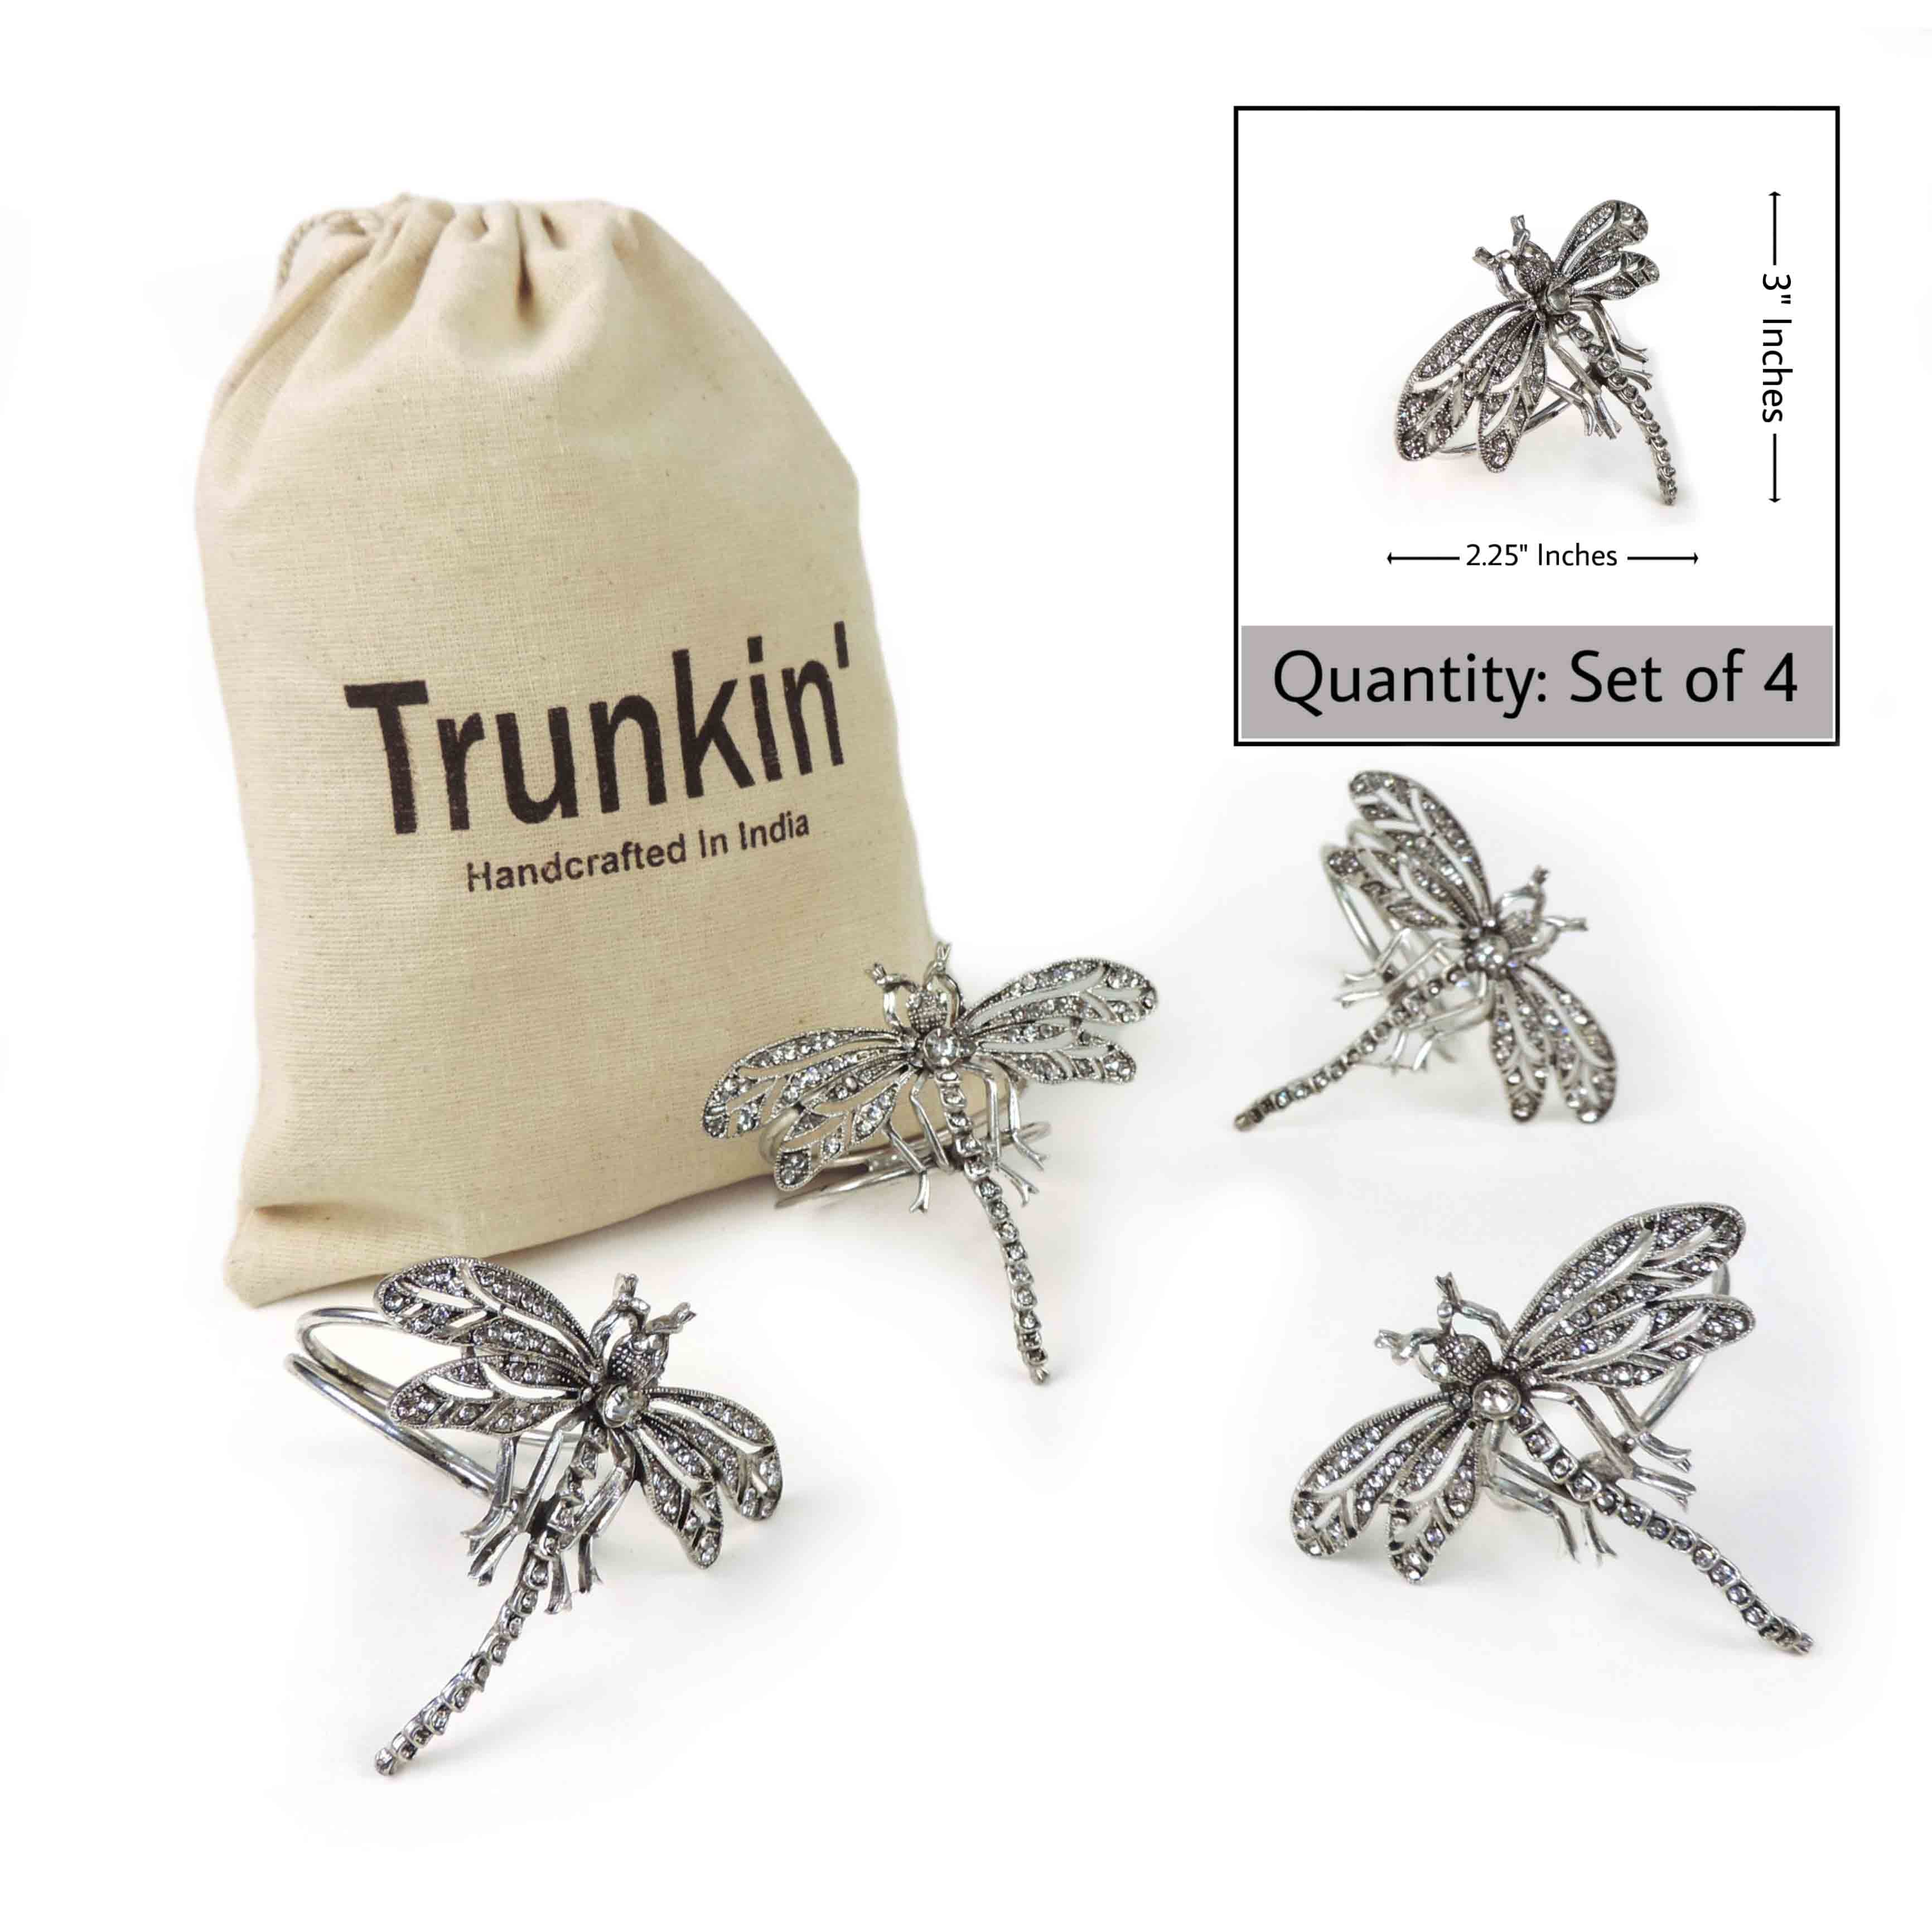 Jeweled Dragonfly Napkin Ring in Silver, Set of 4